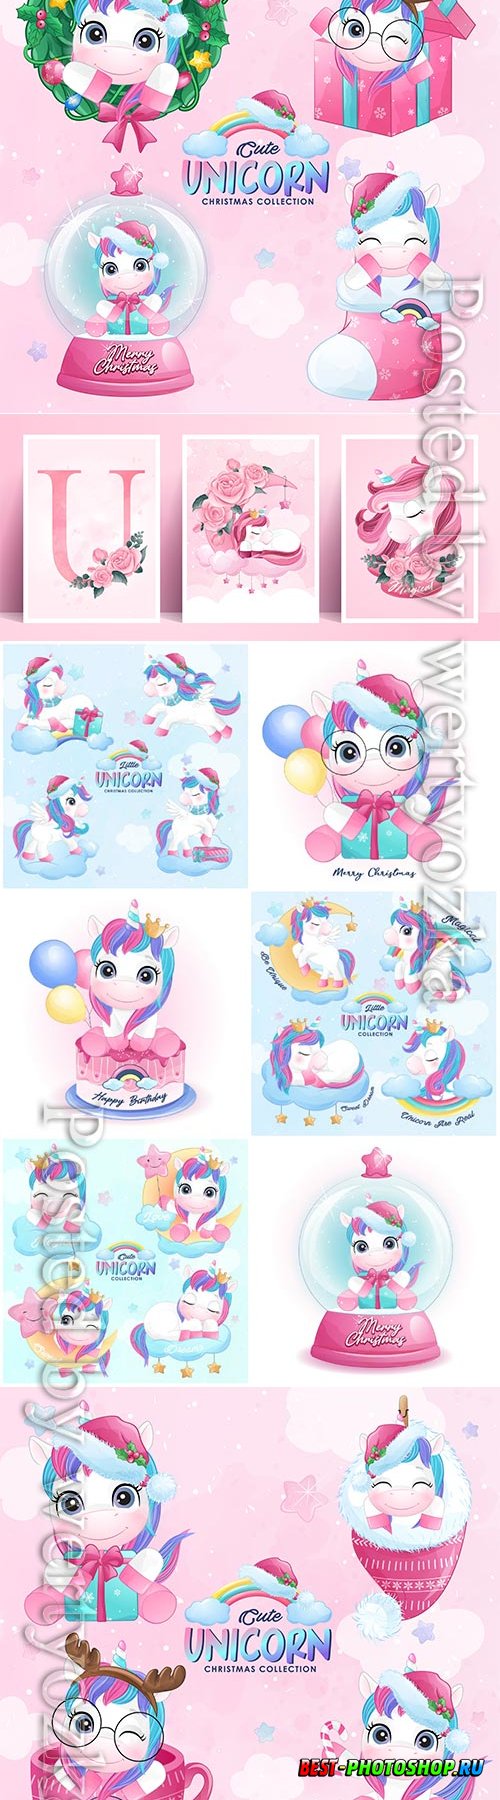 Cute doodle unicorn vector set in watercolor style